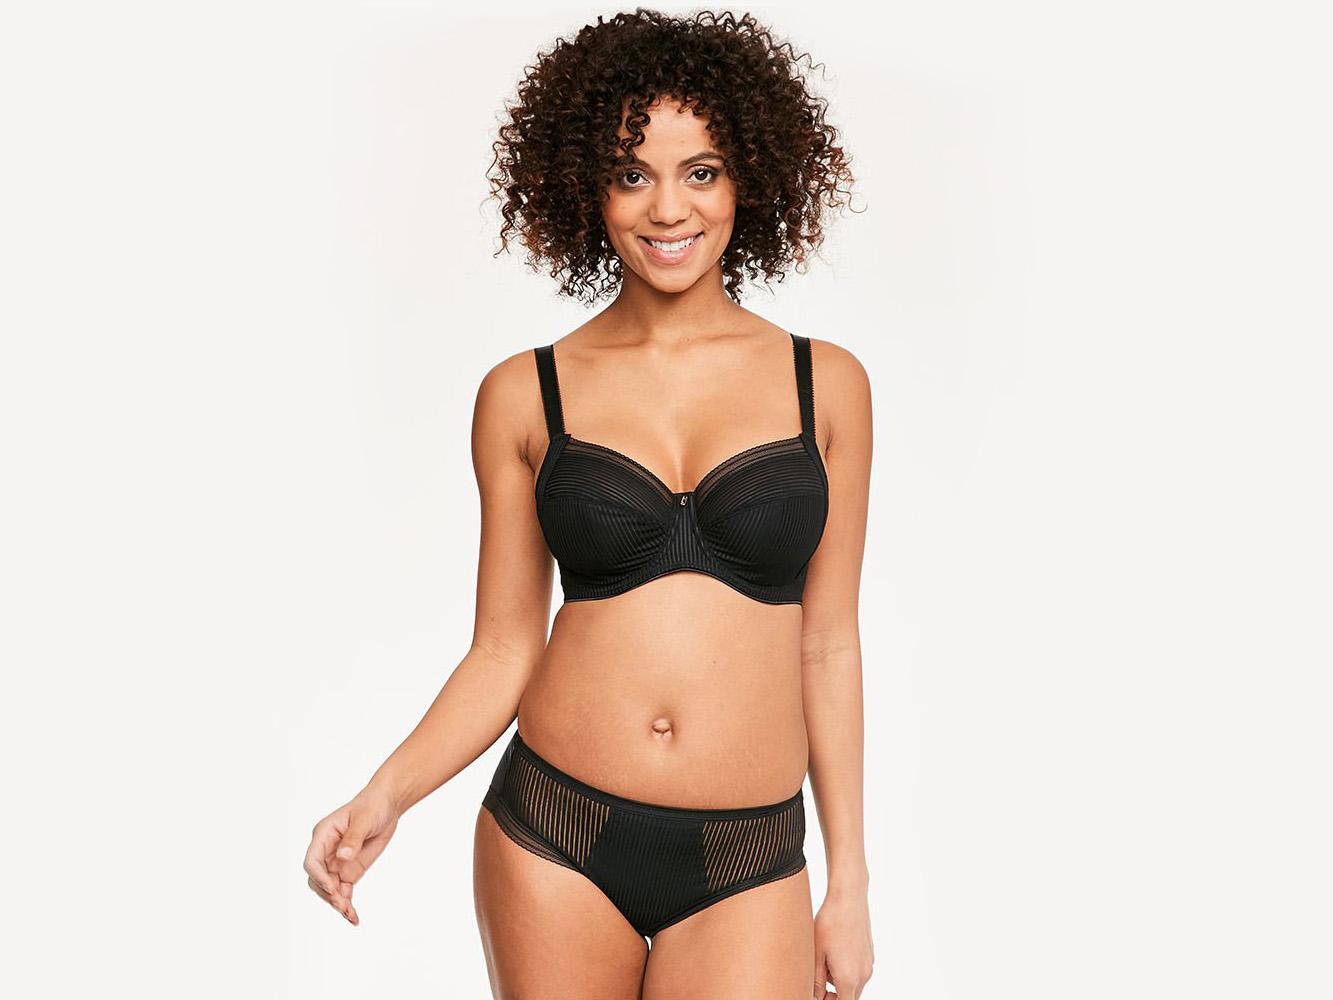 https://static.independent.co.uk/s3fs-public/thumbnails/image/2018/08/02/16/figleaves-fusion-full-cup-side-support-bra.jpg